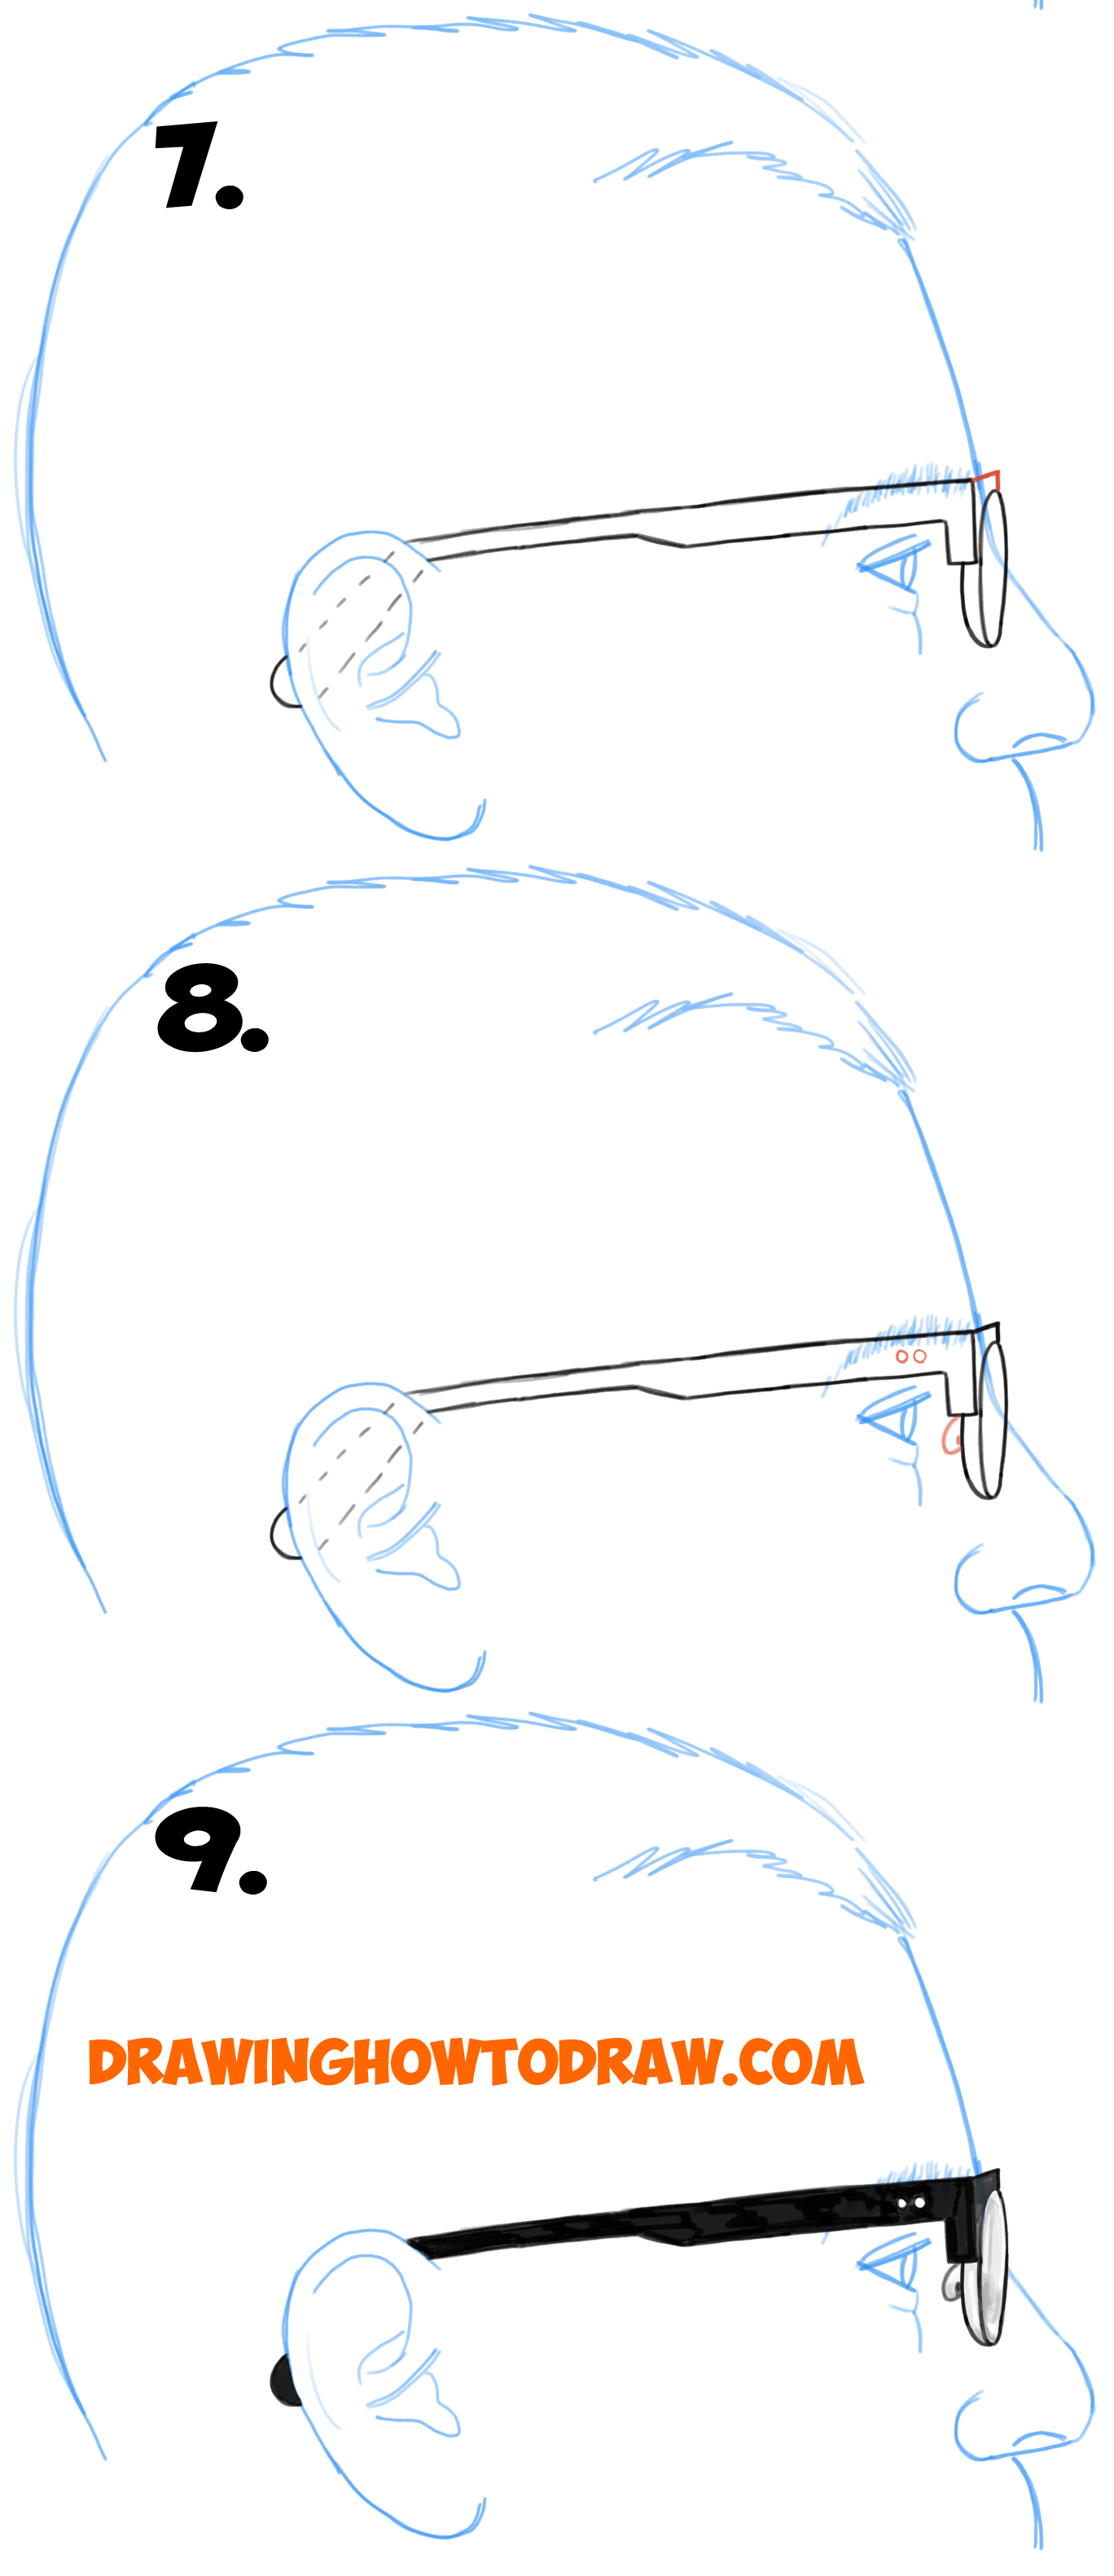 How to Draw Glasses on a Person's Face from the Side Angle View (Profile) easy steps drawing lesson 